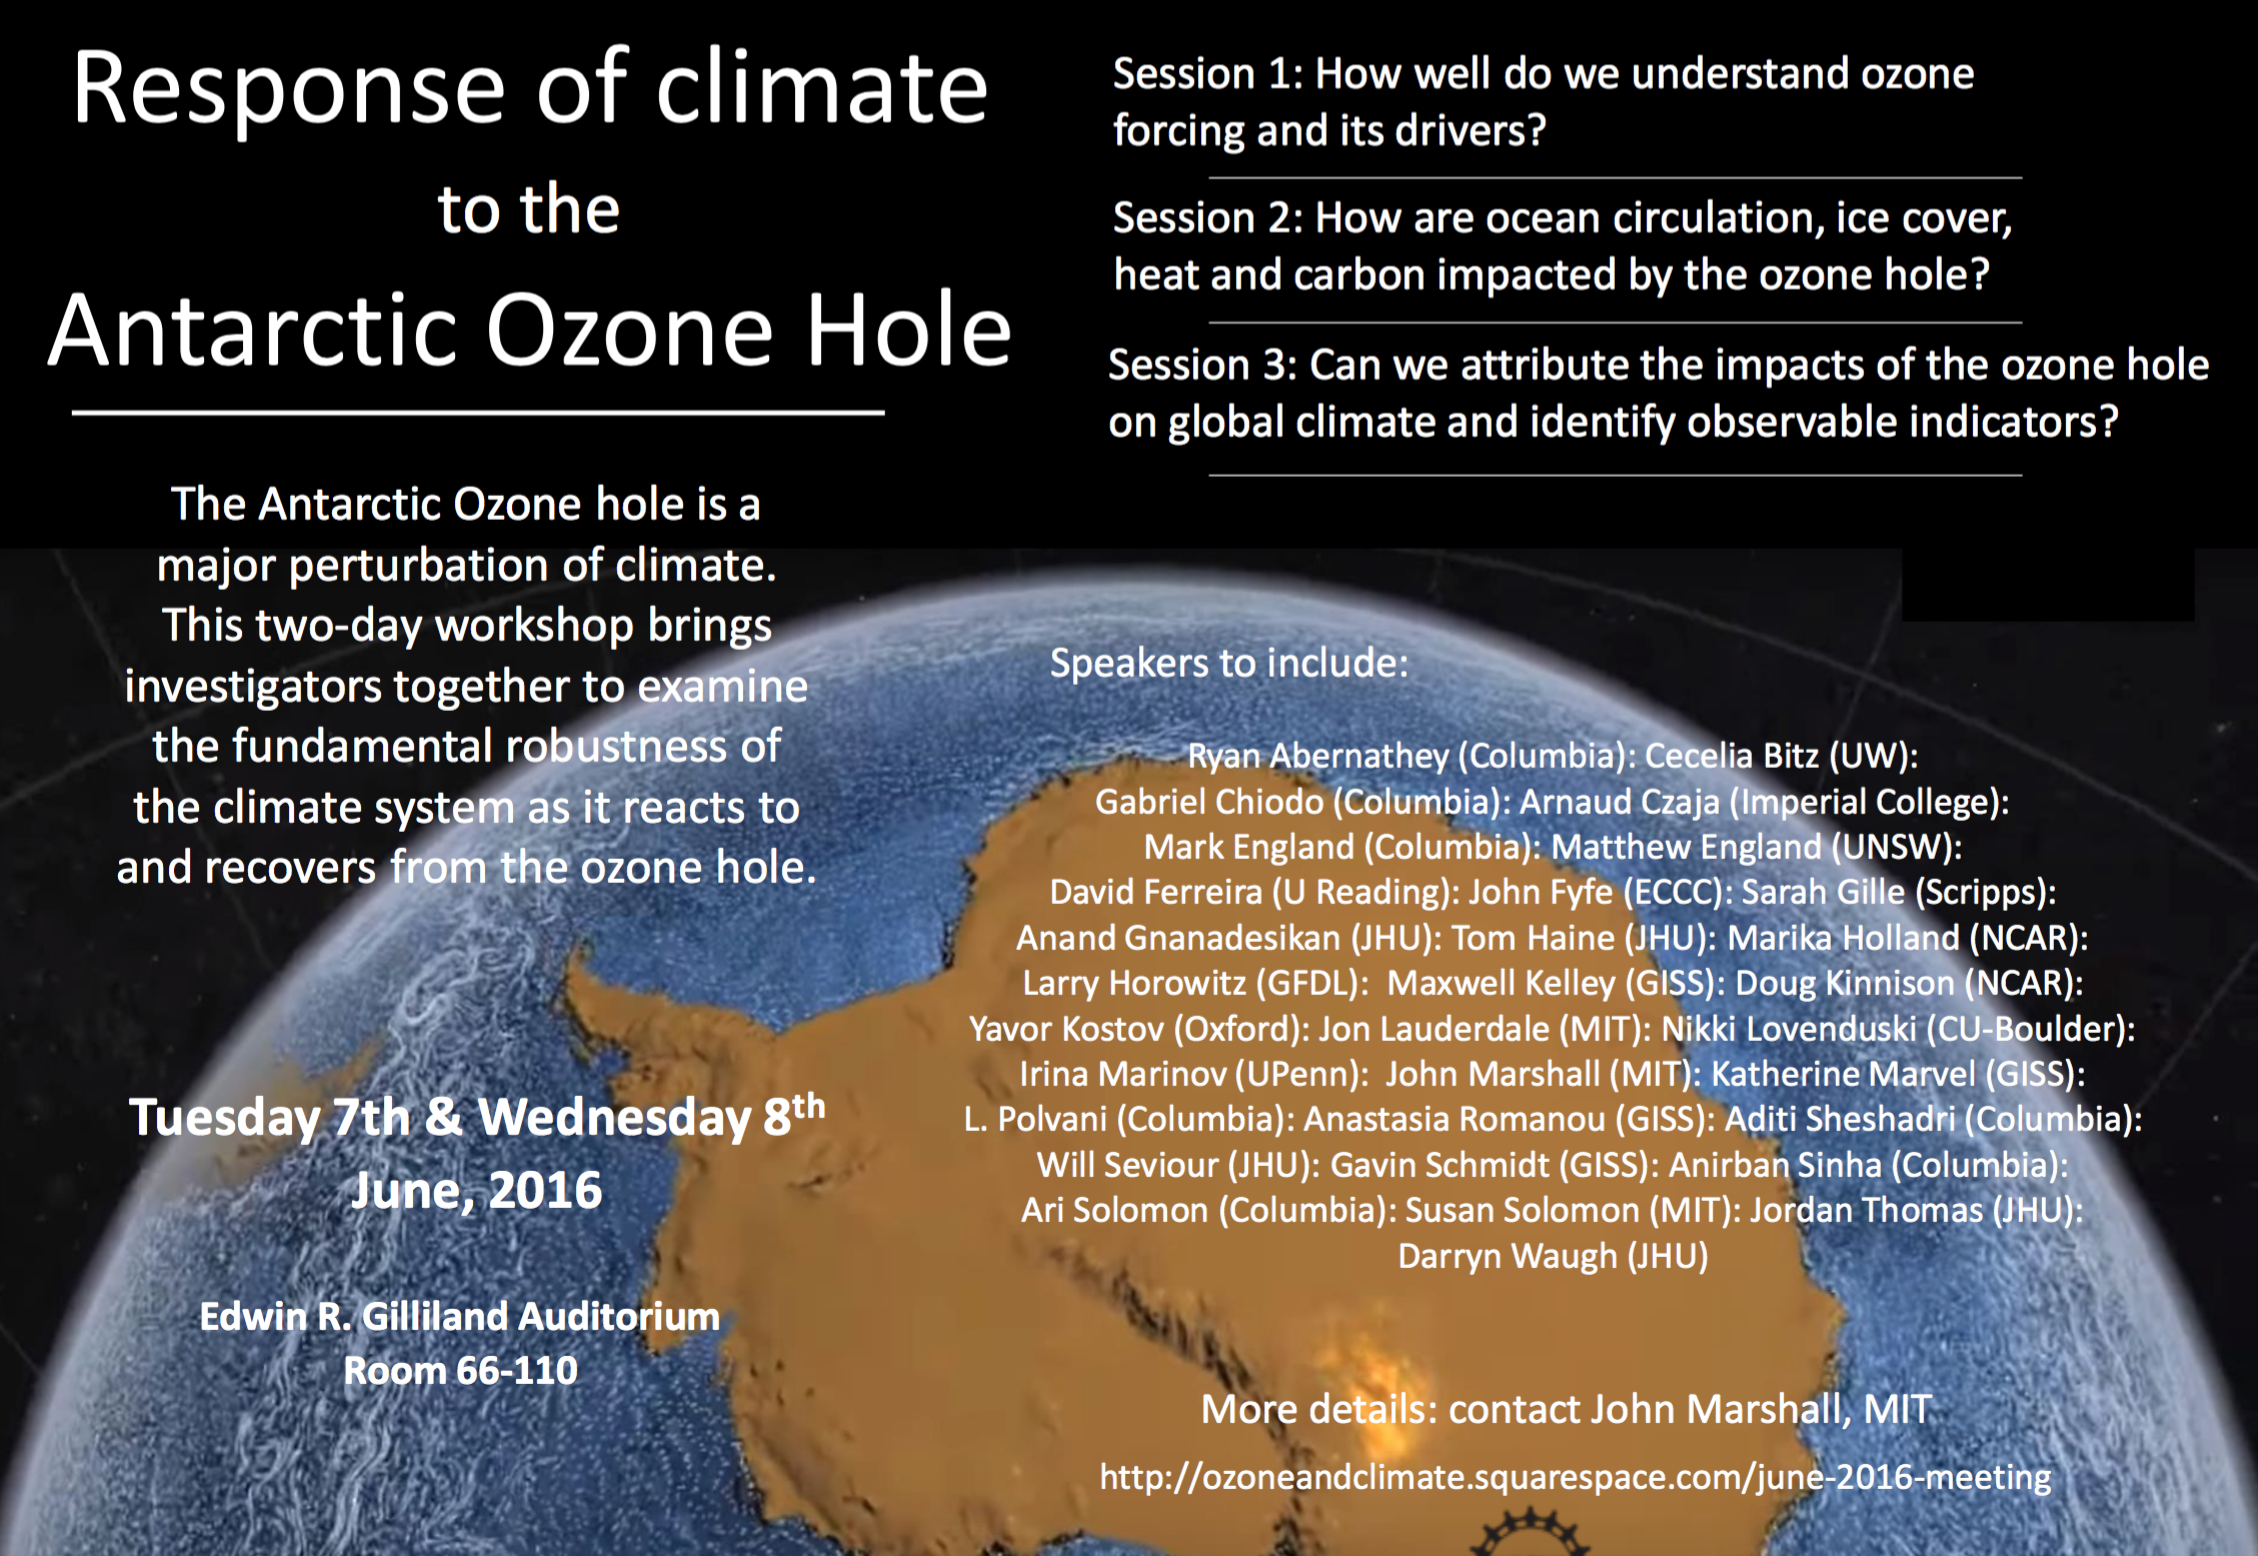 Response of Climate to Antarctic Ozone Hole